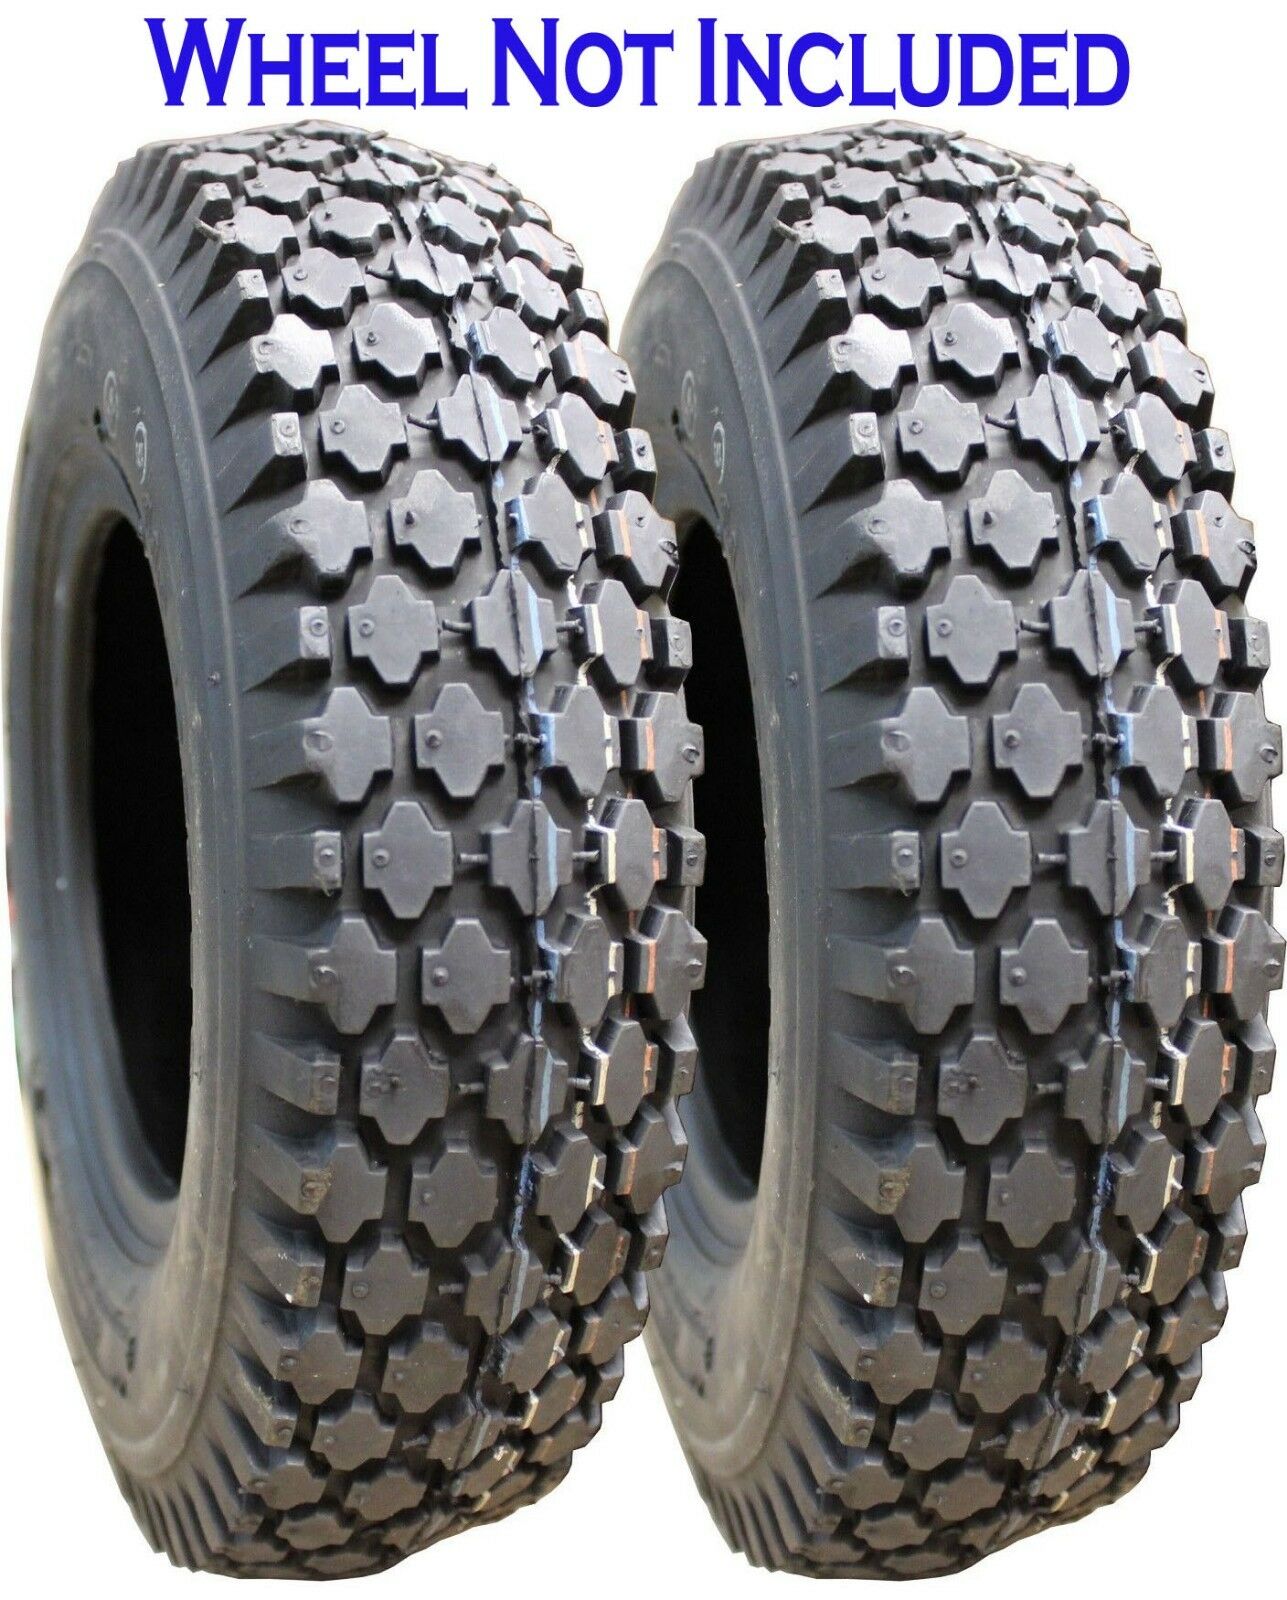 Greenball Stud S356 Transmaster Utility Tire 4ply 4.80/4.00-8 Pack of 2